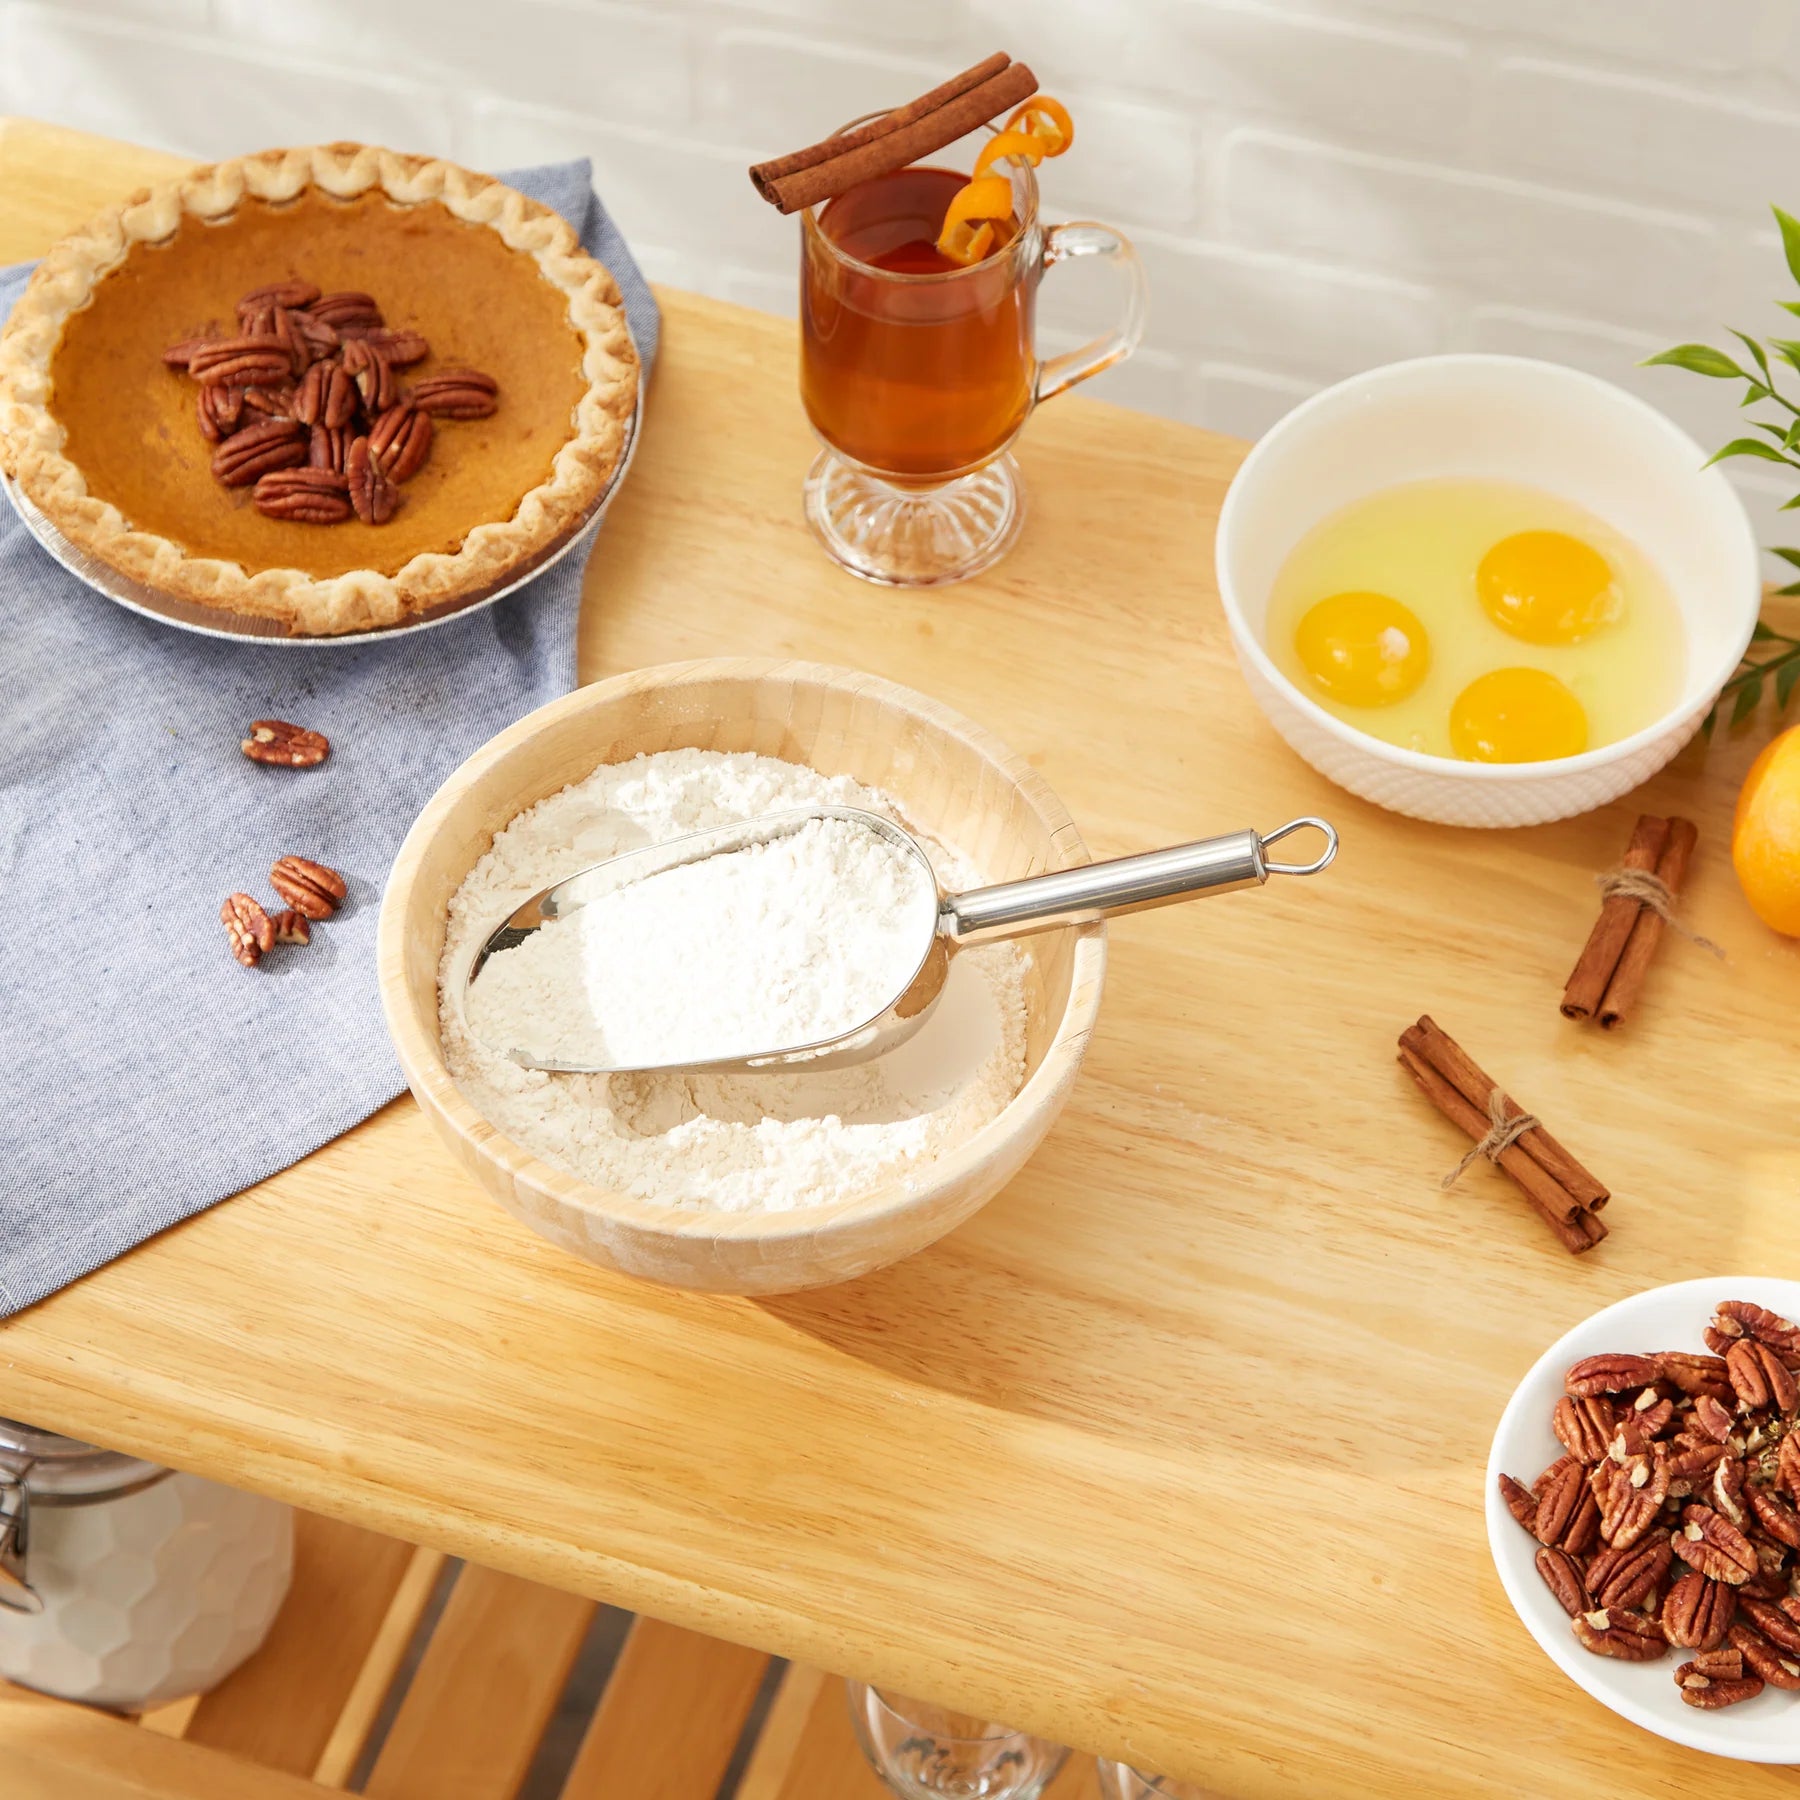 Scene with RSVP scoop in bowl of flour, baking ingredients and a pecan pie